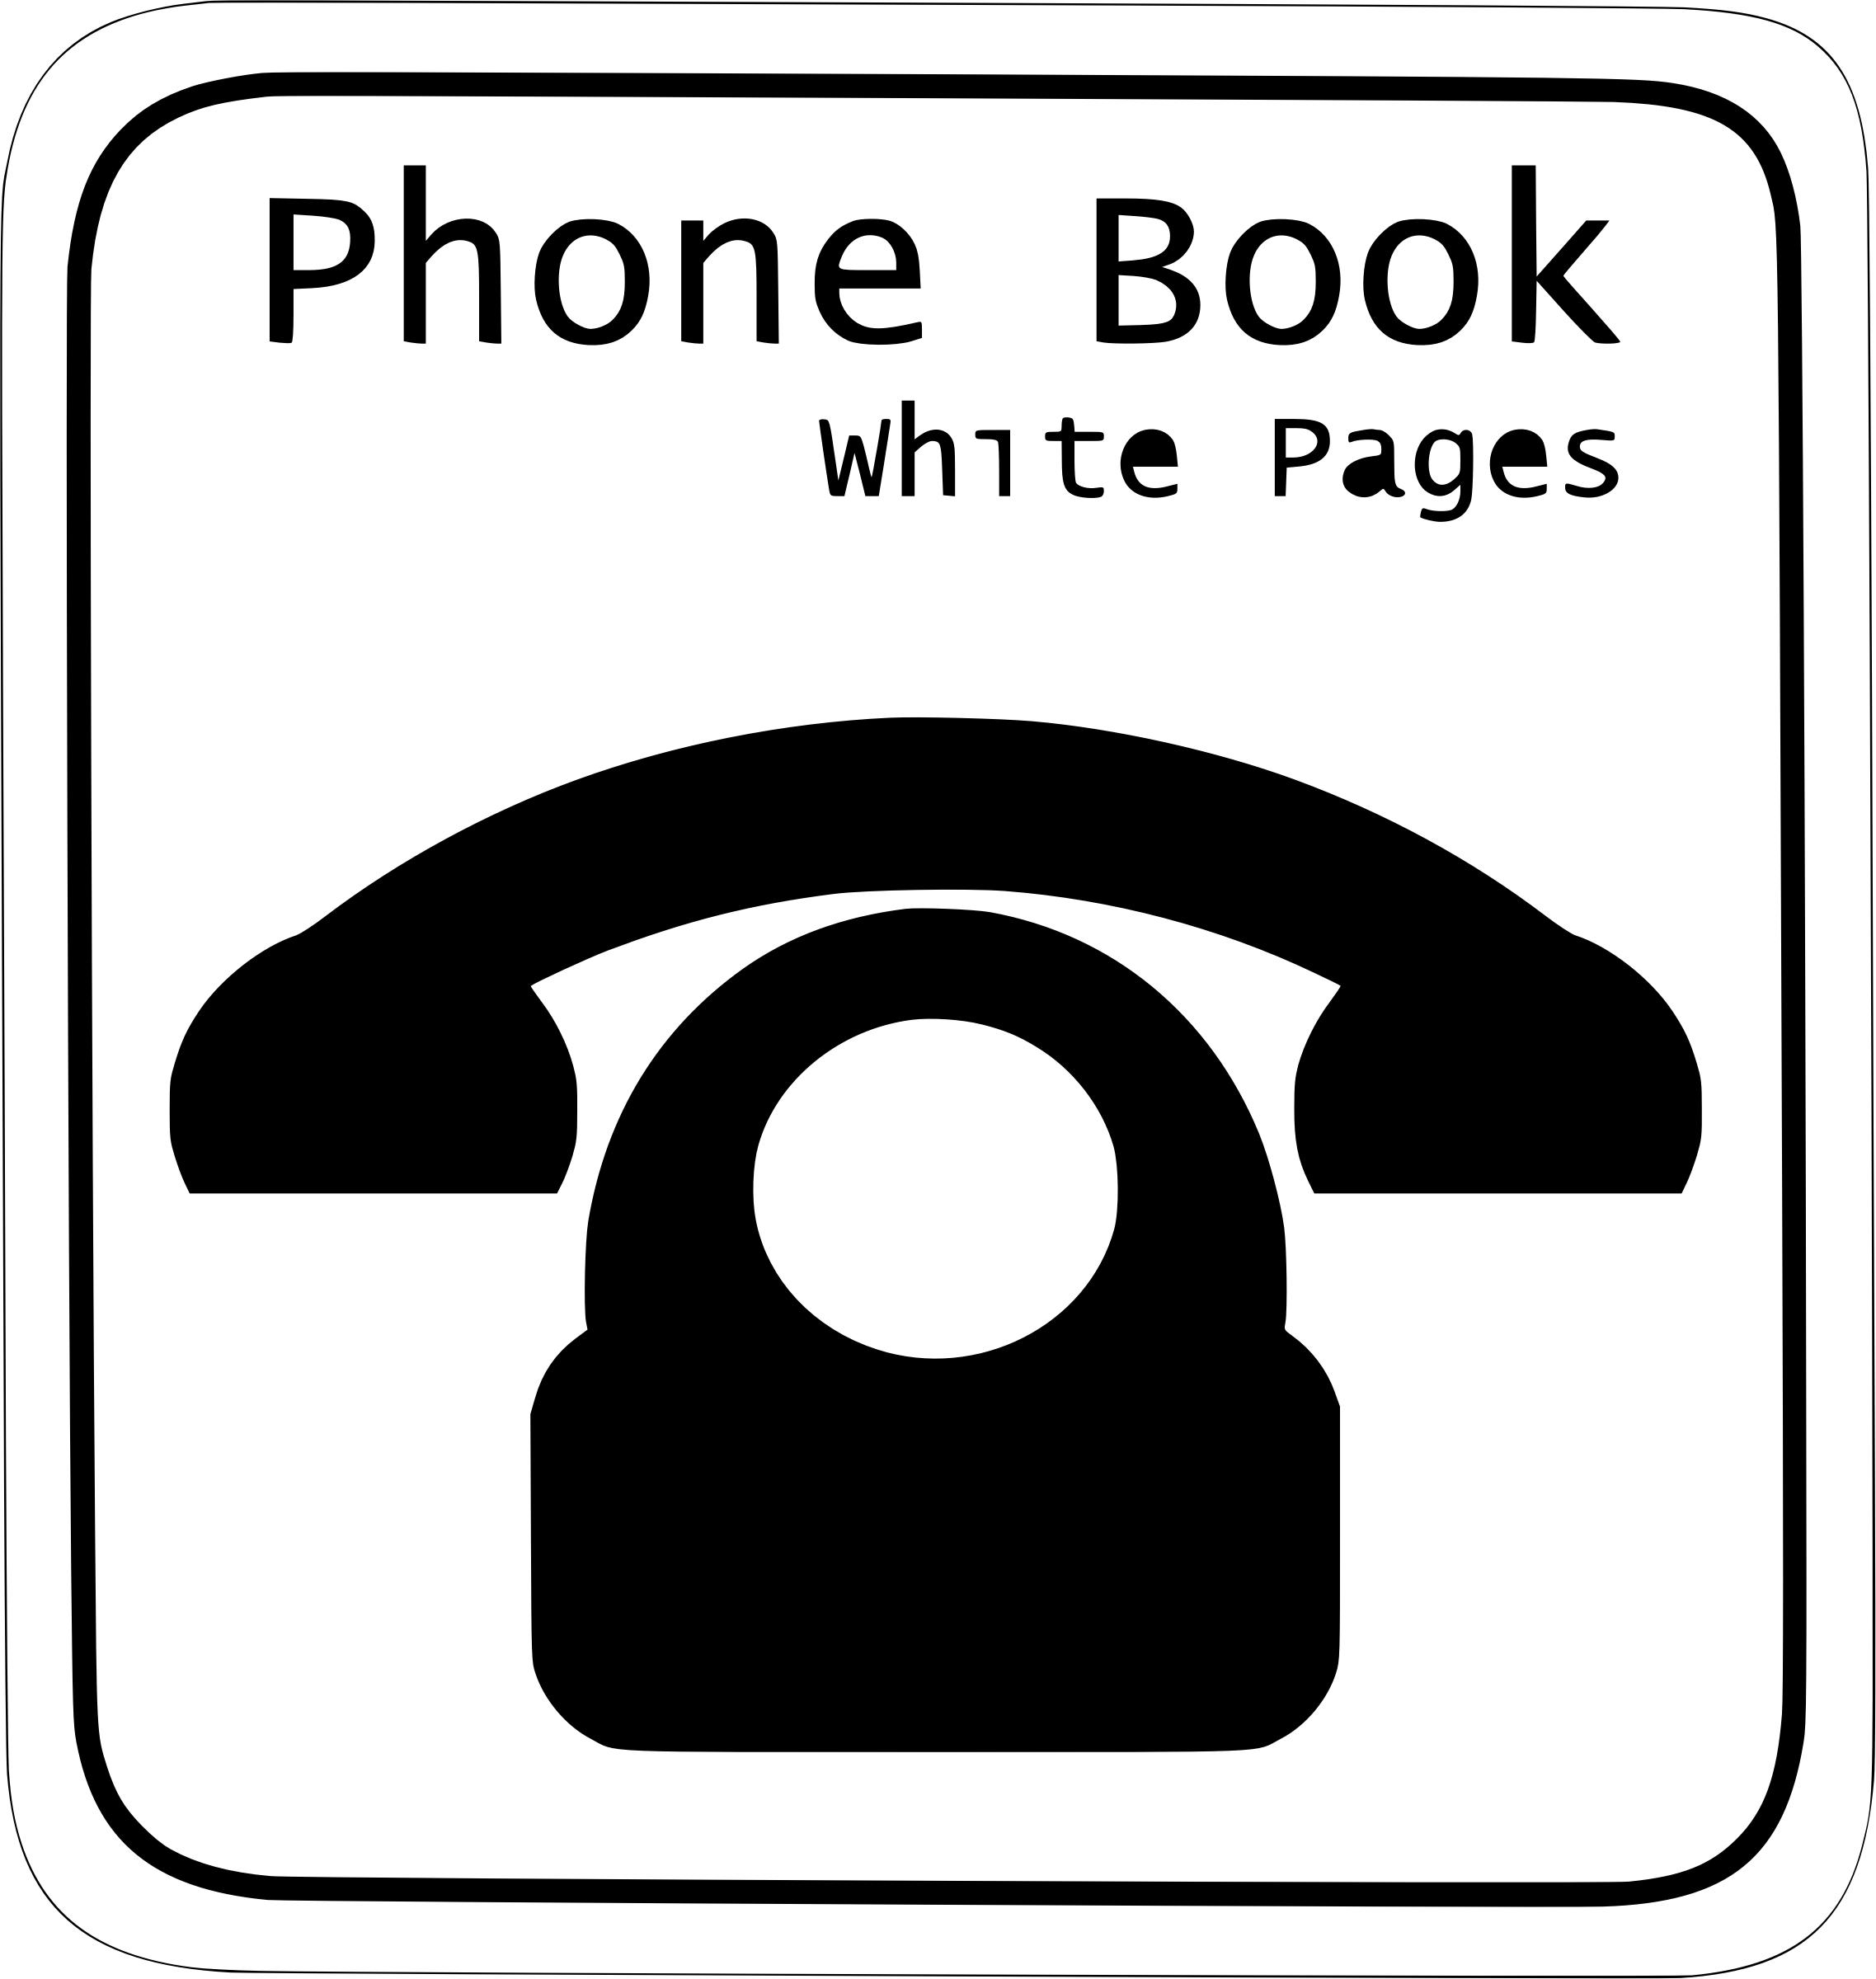 white pages phone book PNG icons